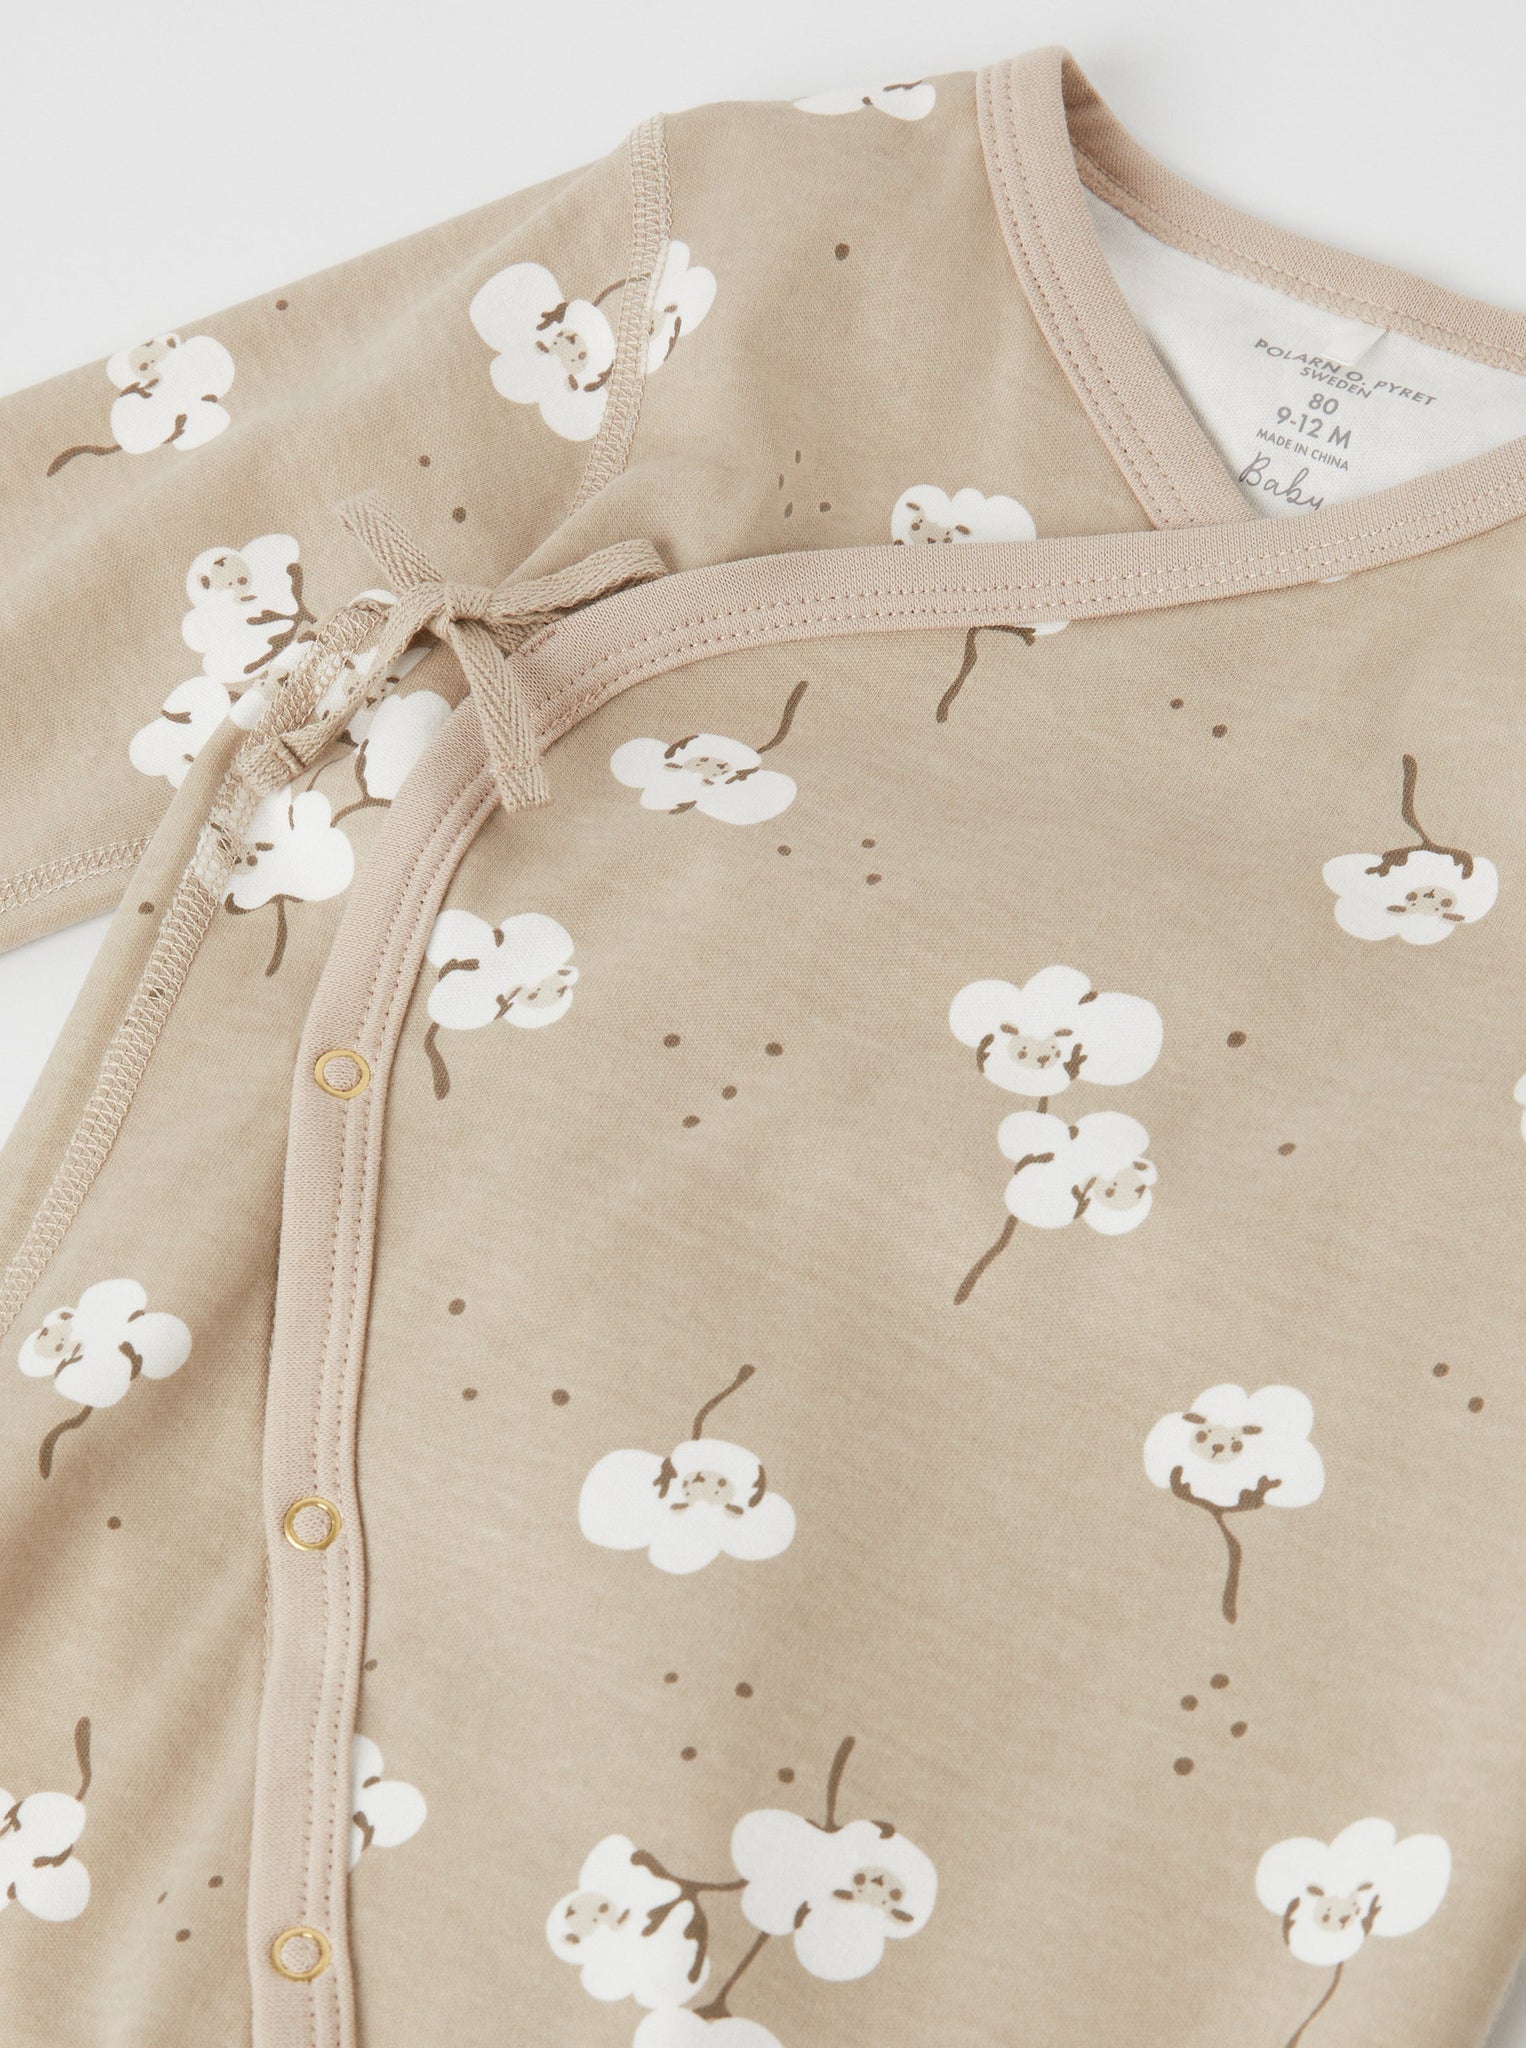 Sheep Print Cotton Baby Romper from the Polarn O. Pyret babywear collection. Nordic kids clothes made from sustainable sources.